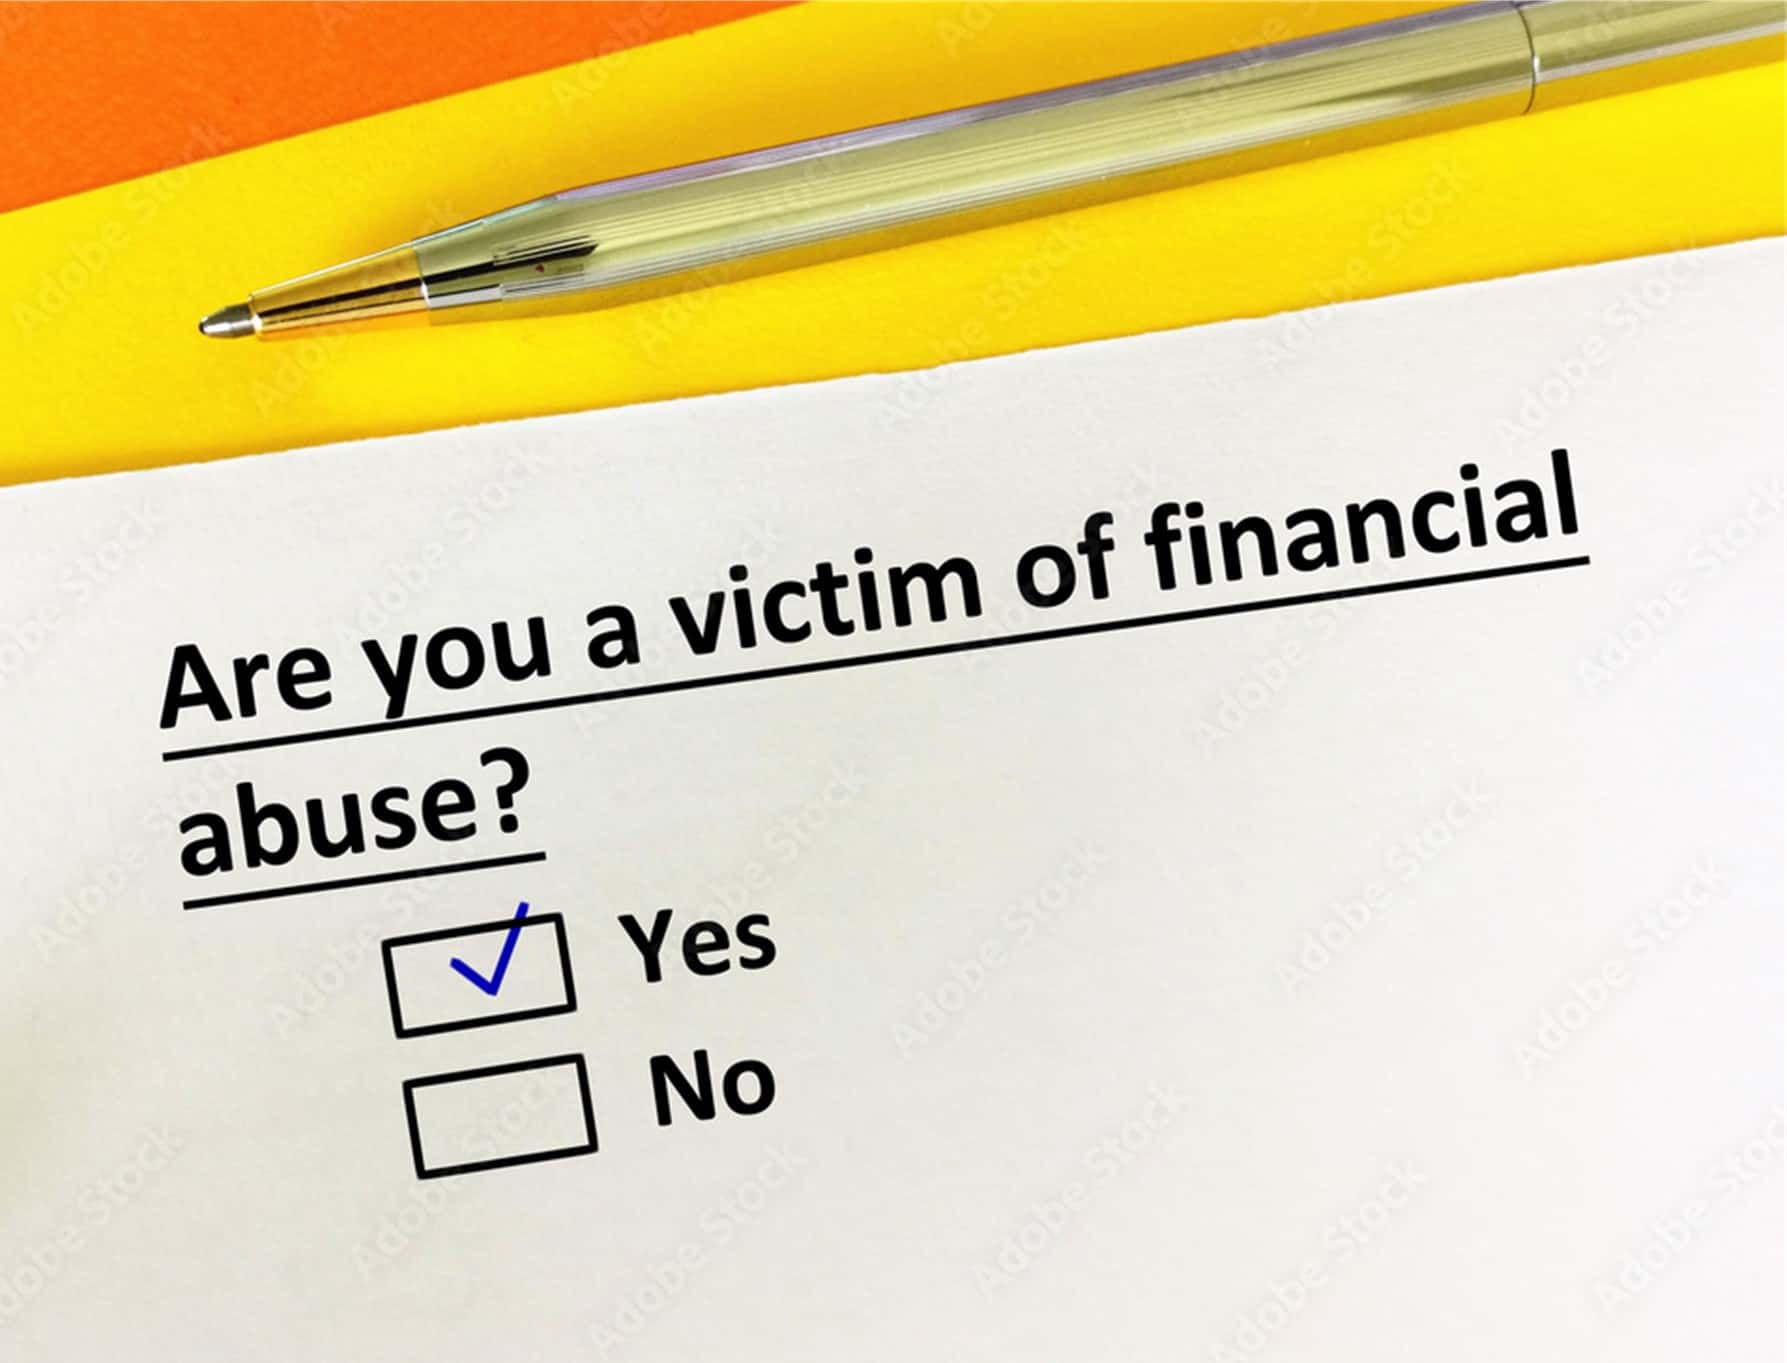 Are you a victim of financial abuse question check box